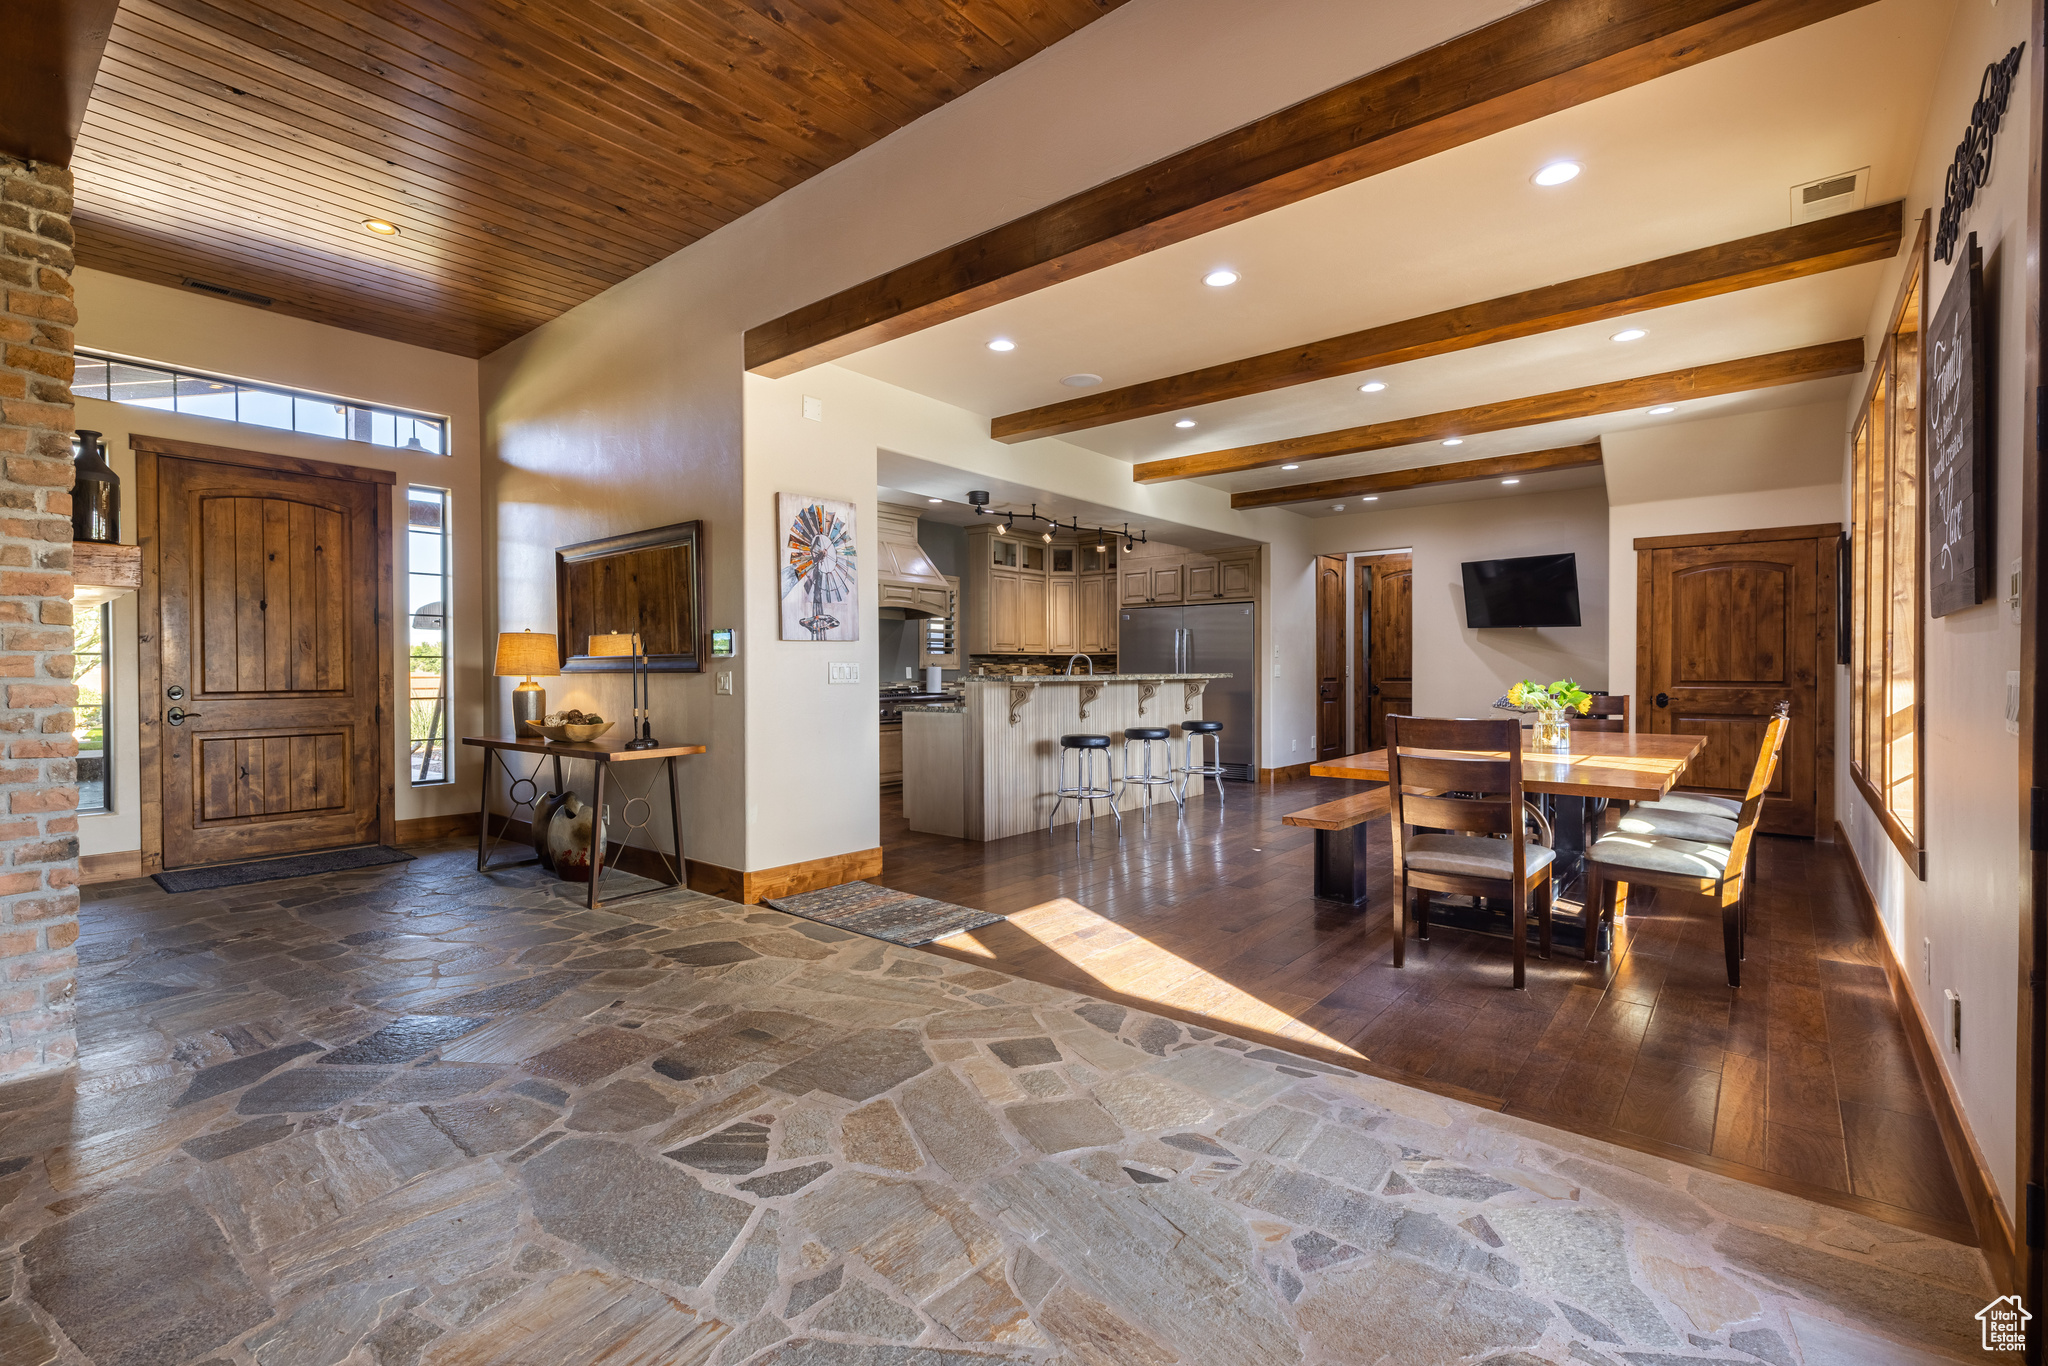 Foyer featuring  the hand hewn slate flooring as well as dark hardwood style flooring in the kitchen and dining area.